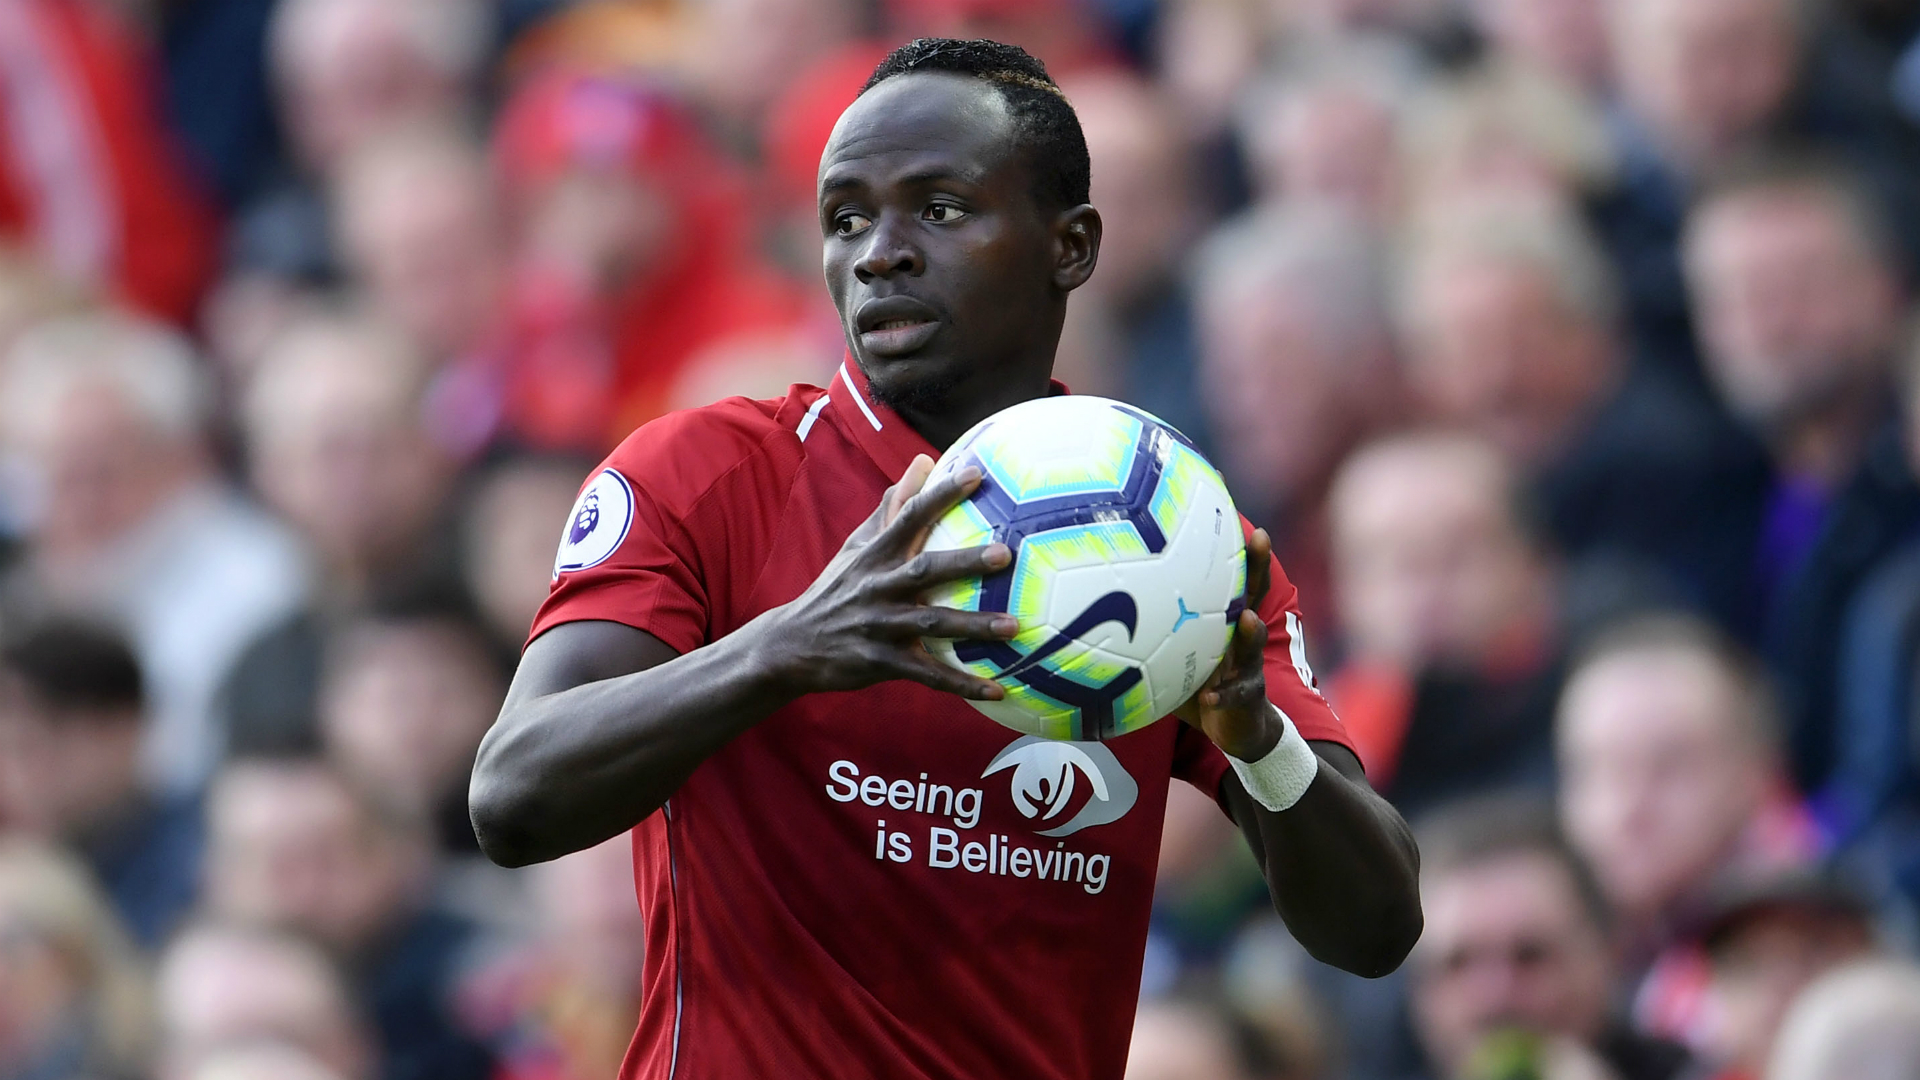 Jurgen Klopp will hope to be without Sadio Mane for too long after the Senegal international underwent surgery.